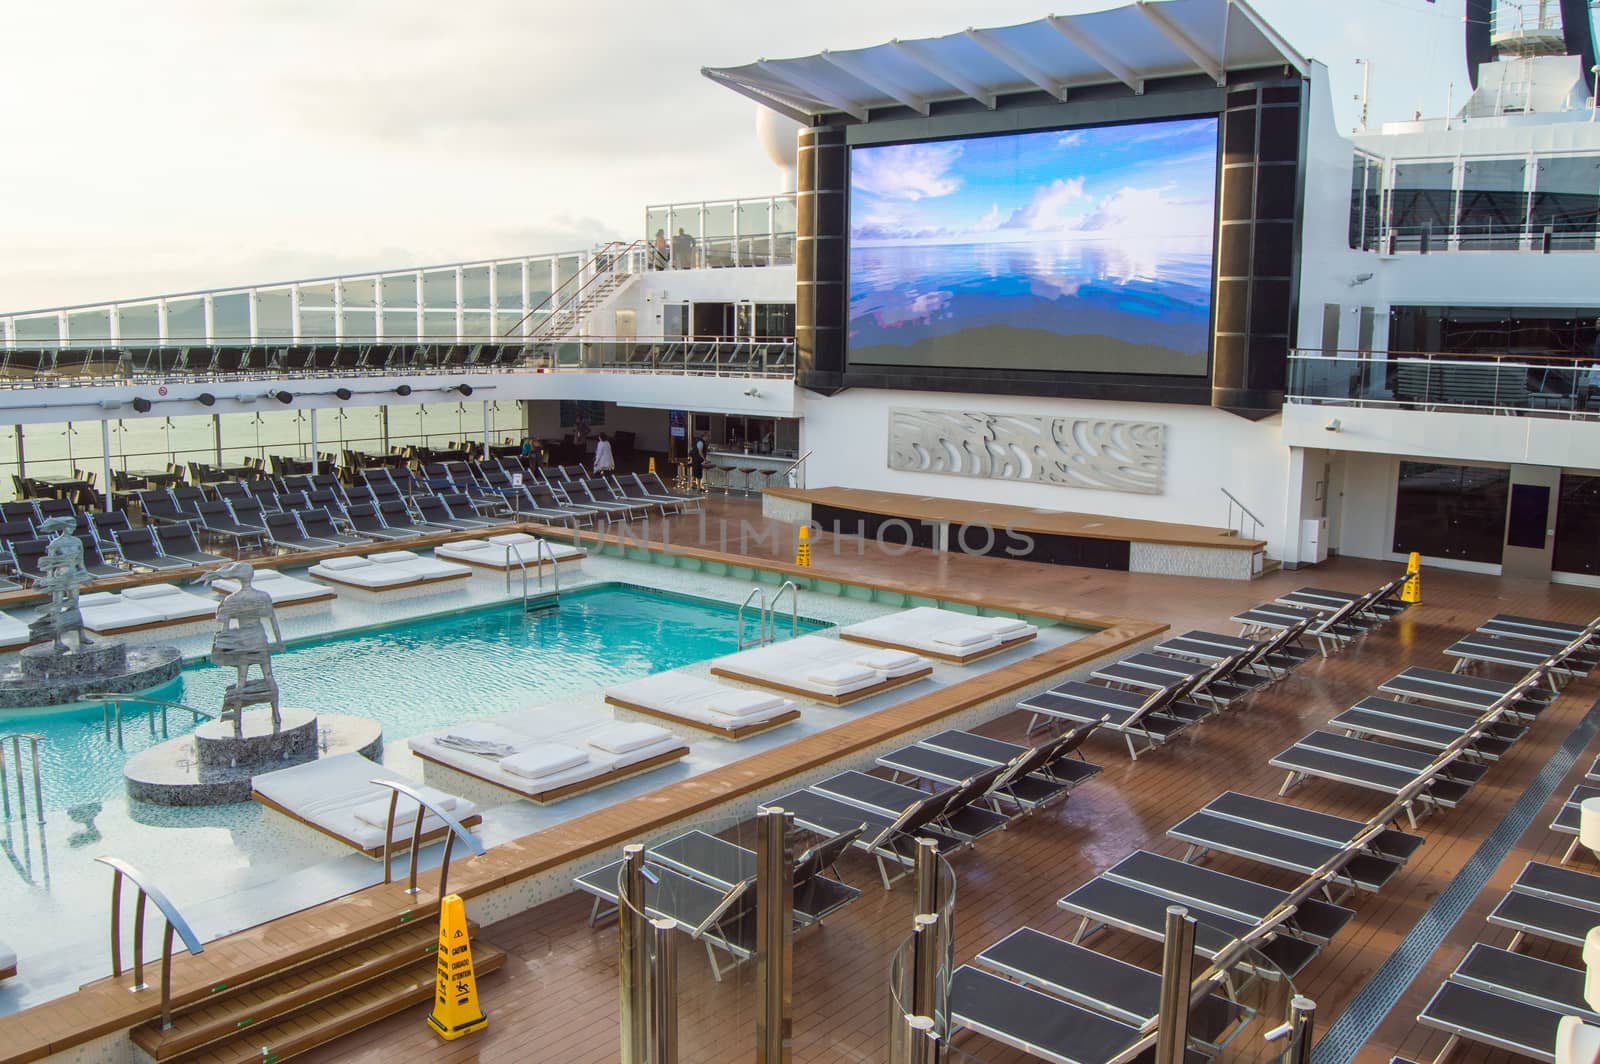 Outdoor deck with swimming pool, sun beds, video screen. CRUISE ship MSC Meraviglia, 8 October 2018. by claire_lucia